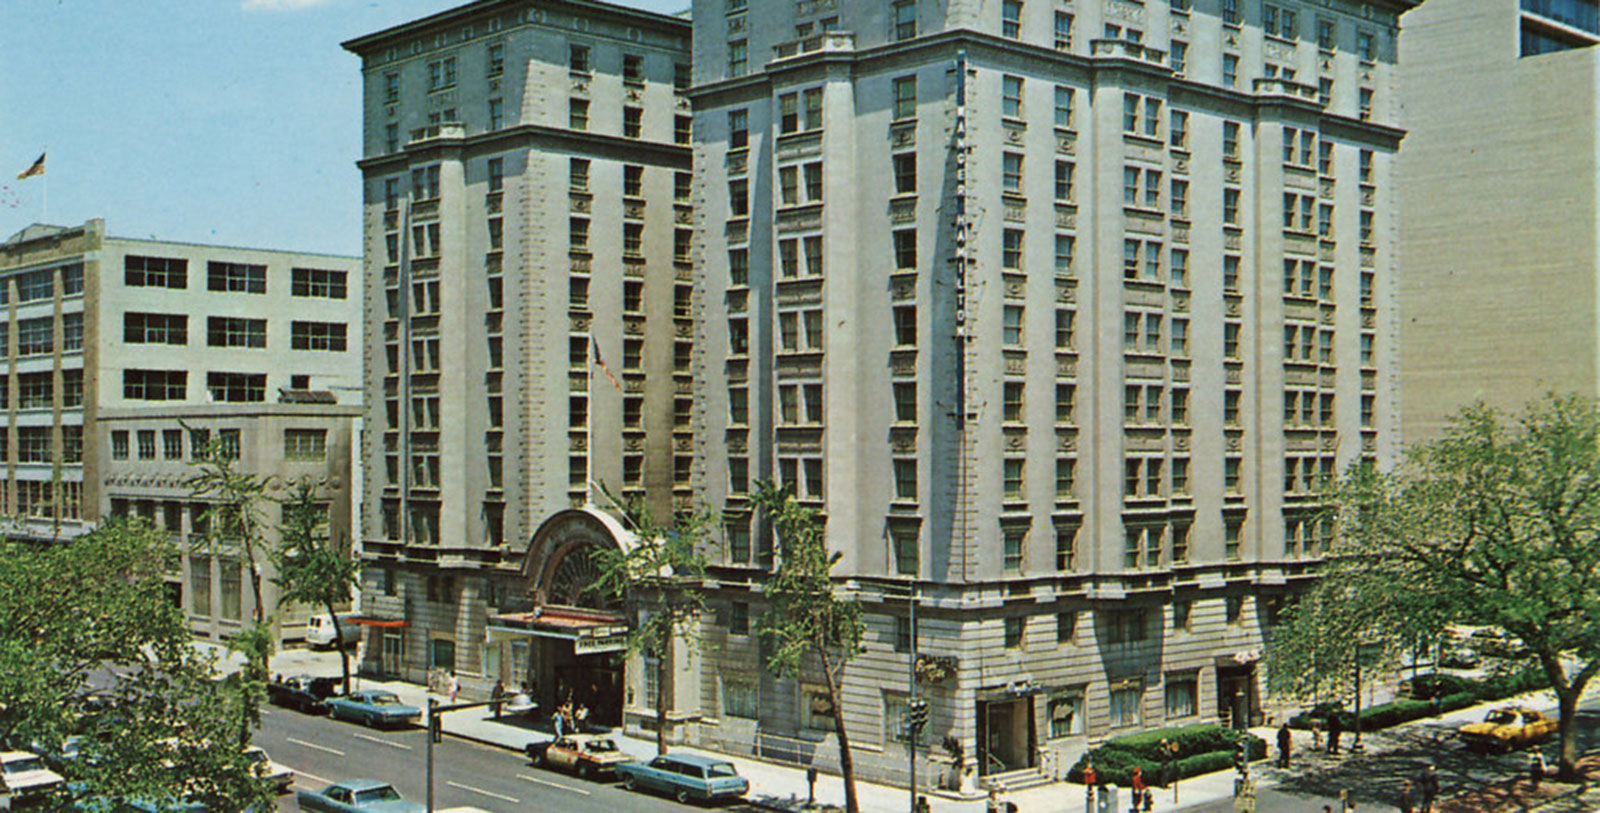 Discover the history of this iconic downtown DC landmark hotel.